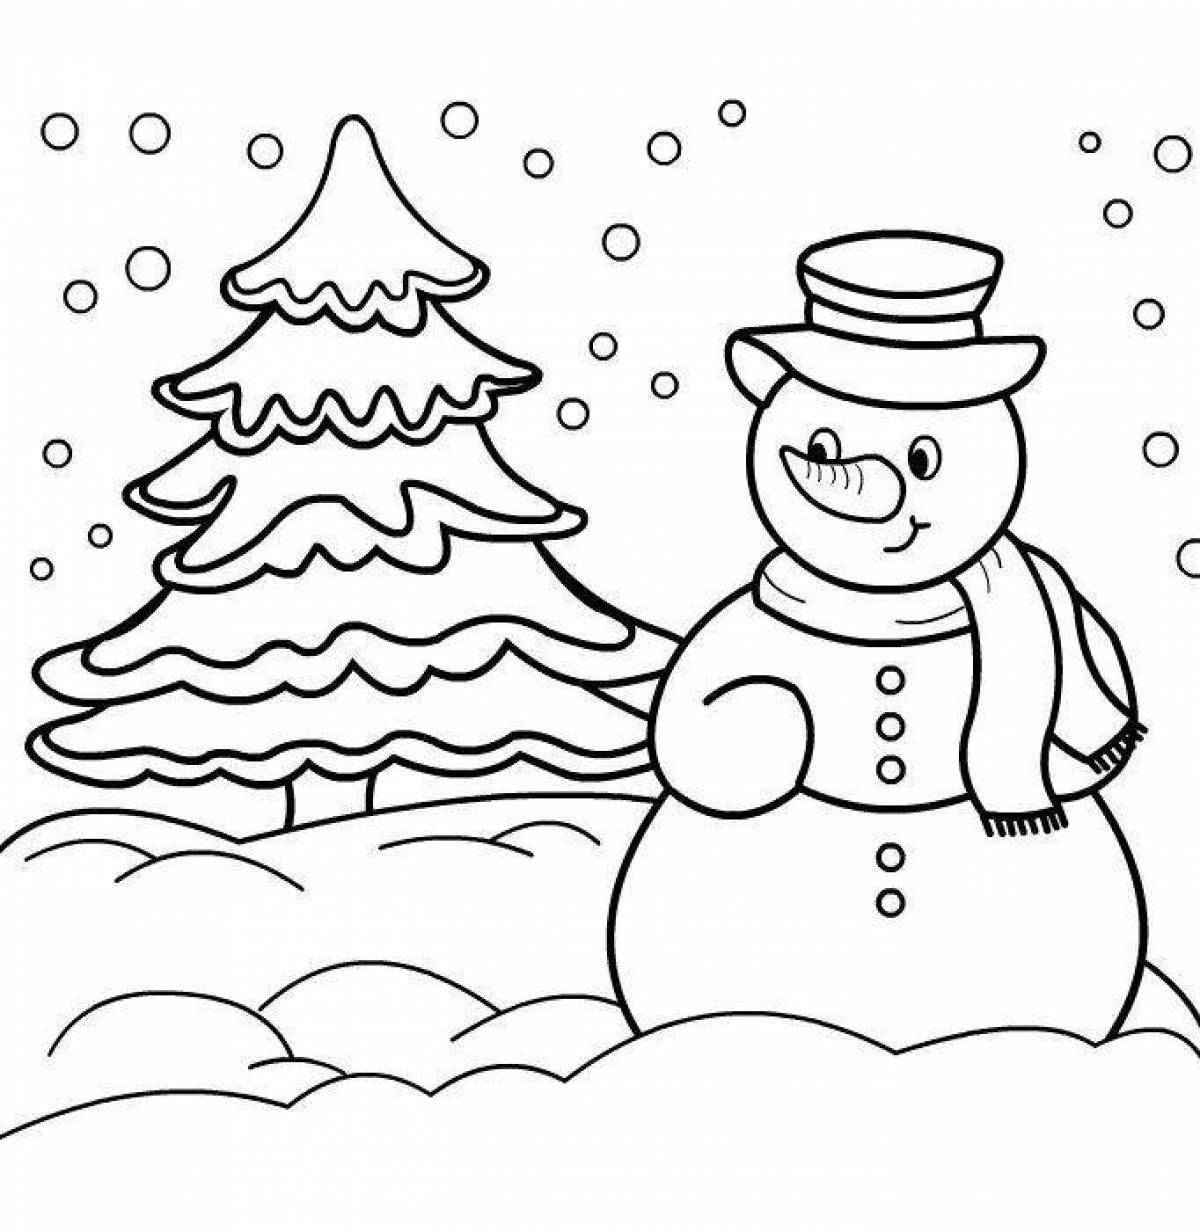 Fabulous coloring book snowman for kids 2 3